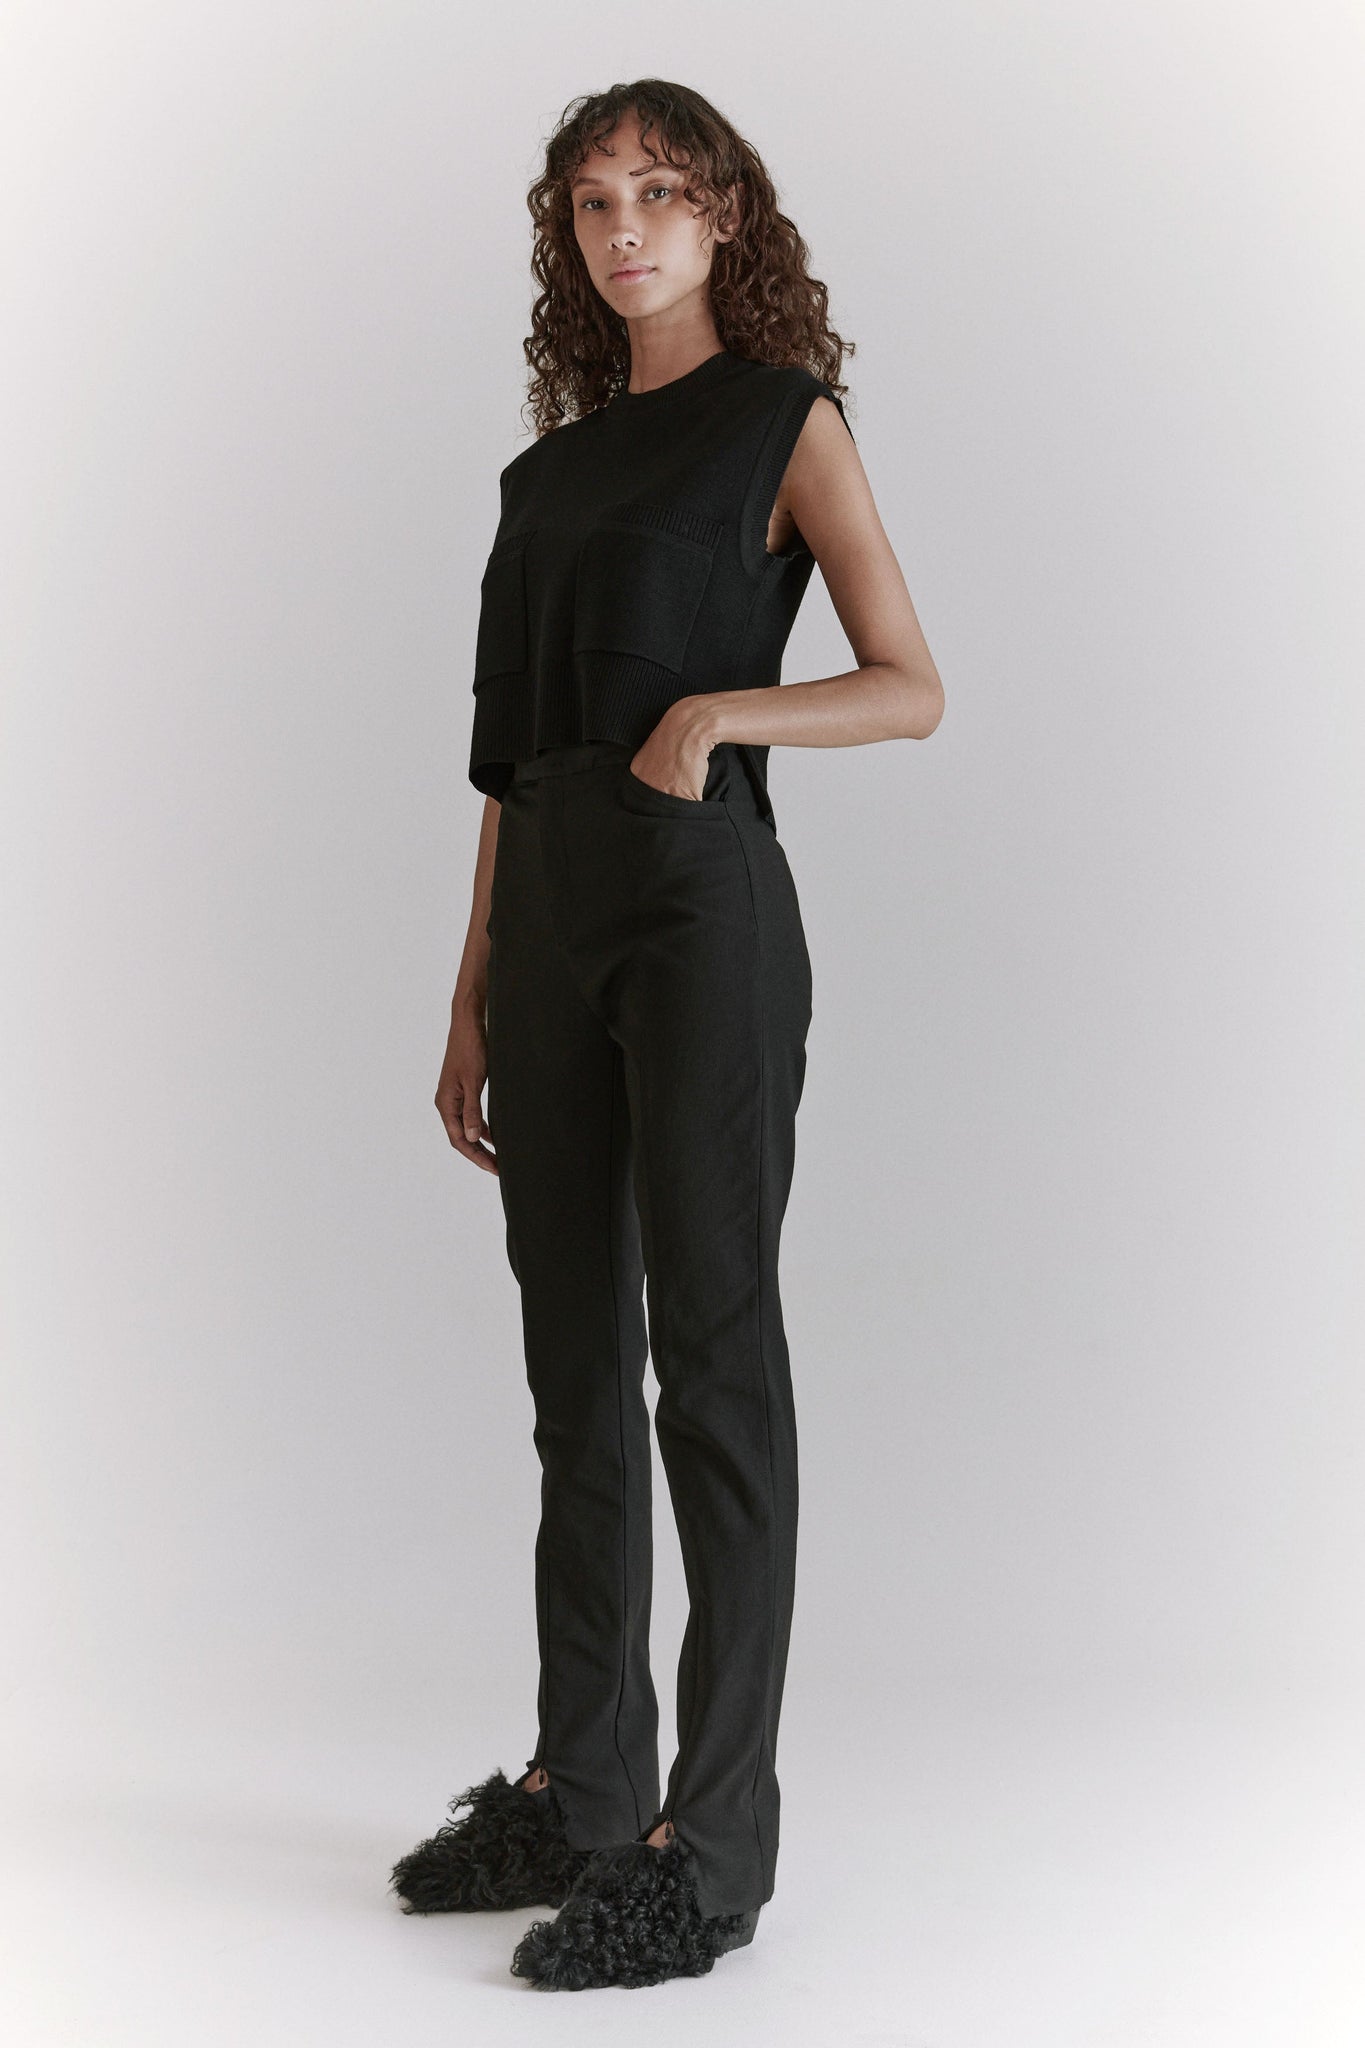 Sharp trousers by Hope - black